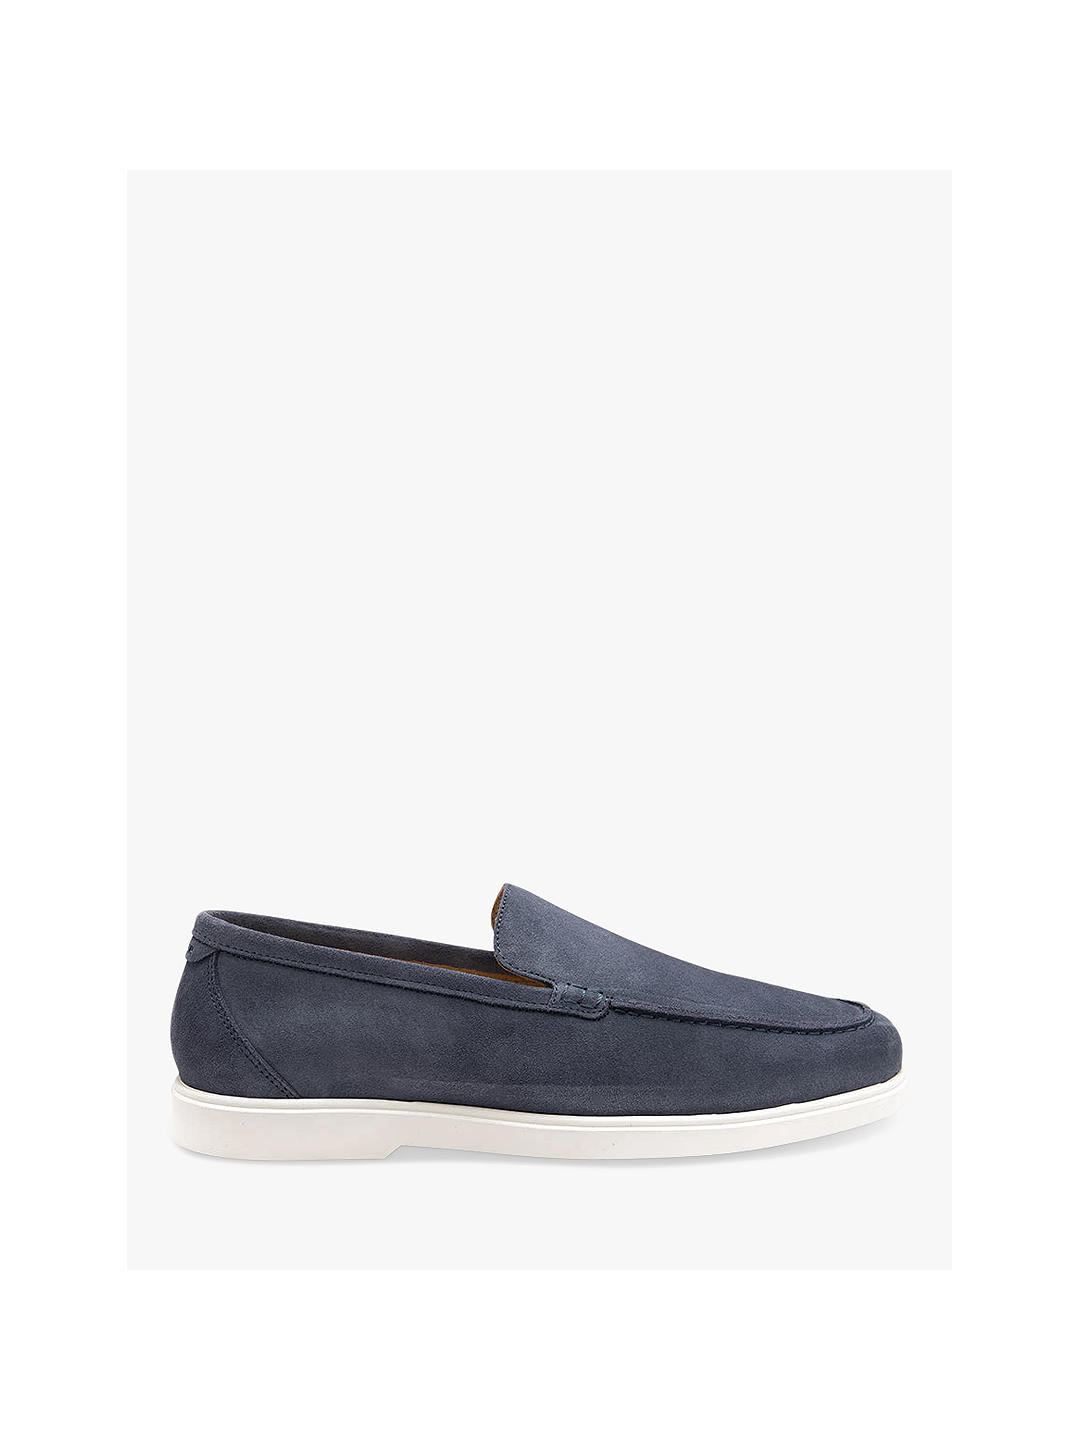 Loake Tuscany Suede Loafers, Blue